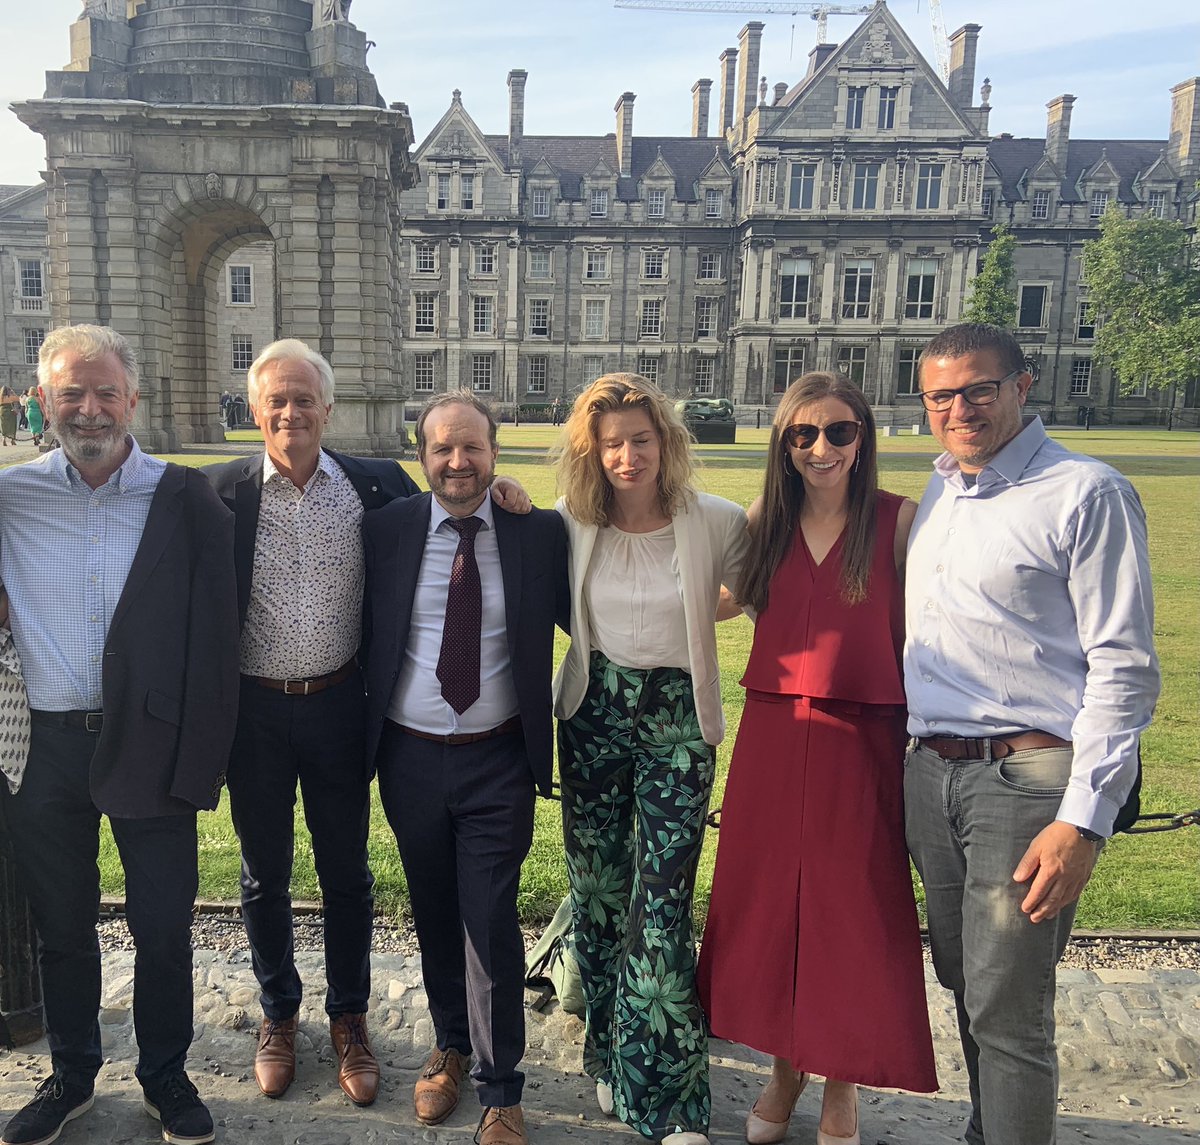 A wonderful week of shared learning and connecting with colleagues from Dublin and around the world .#BBA2023Dublin #stjames @BritishBurn @gorman_aoife